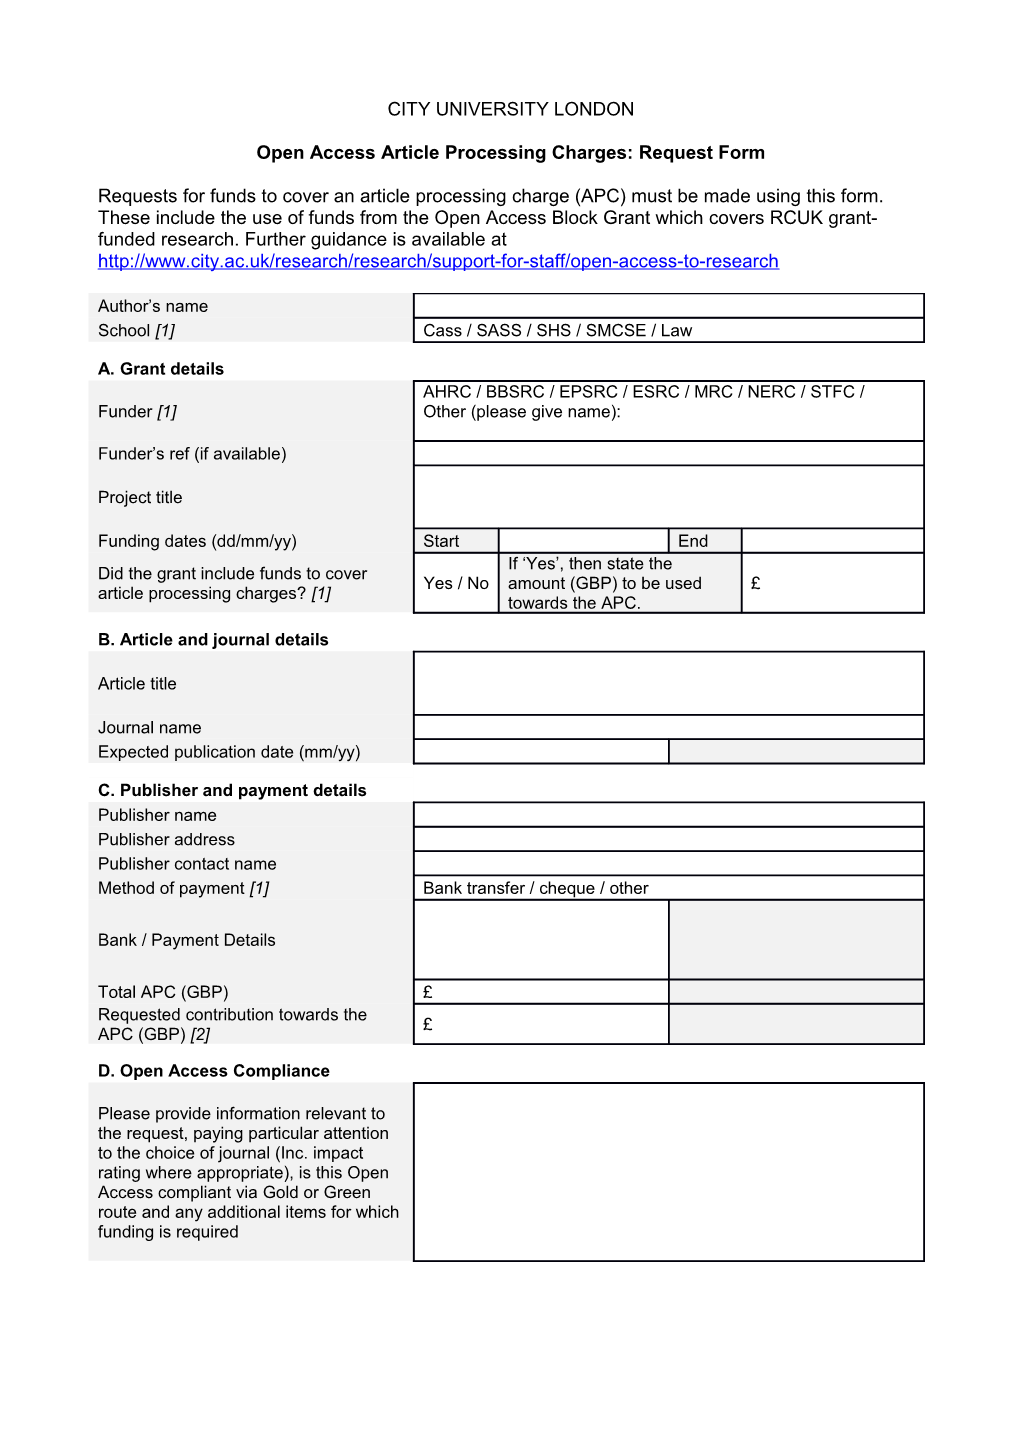 Open Access Article Processing Charges:Request Form